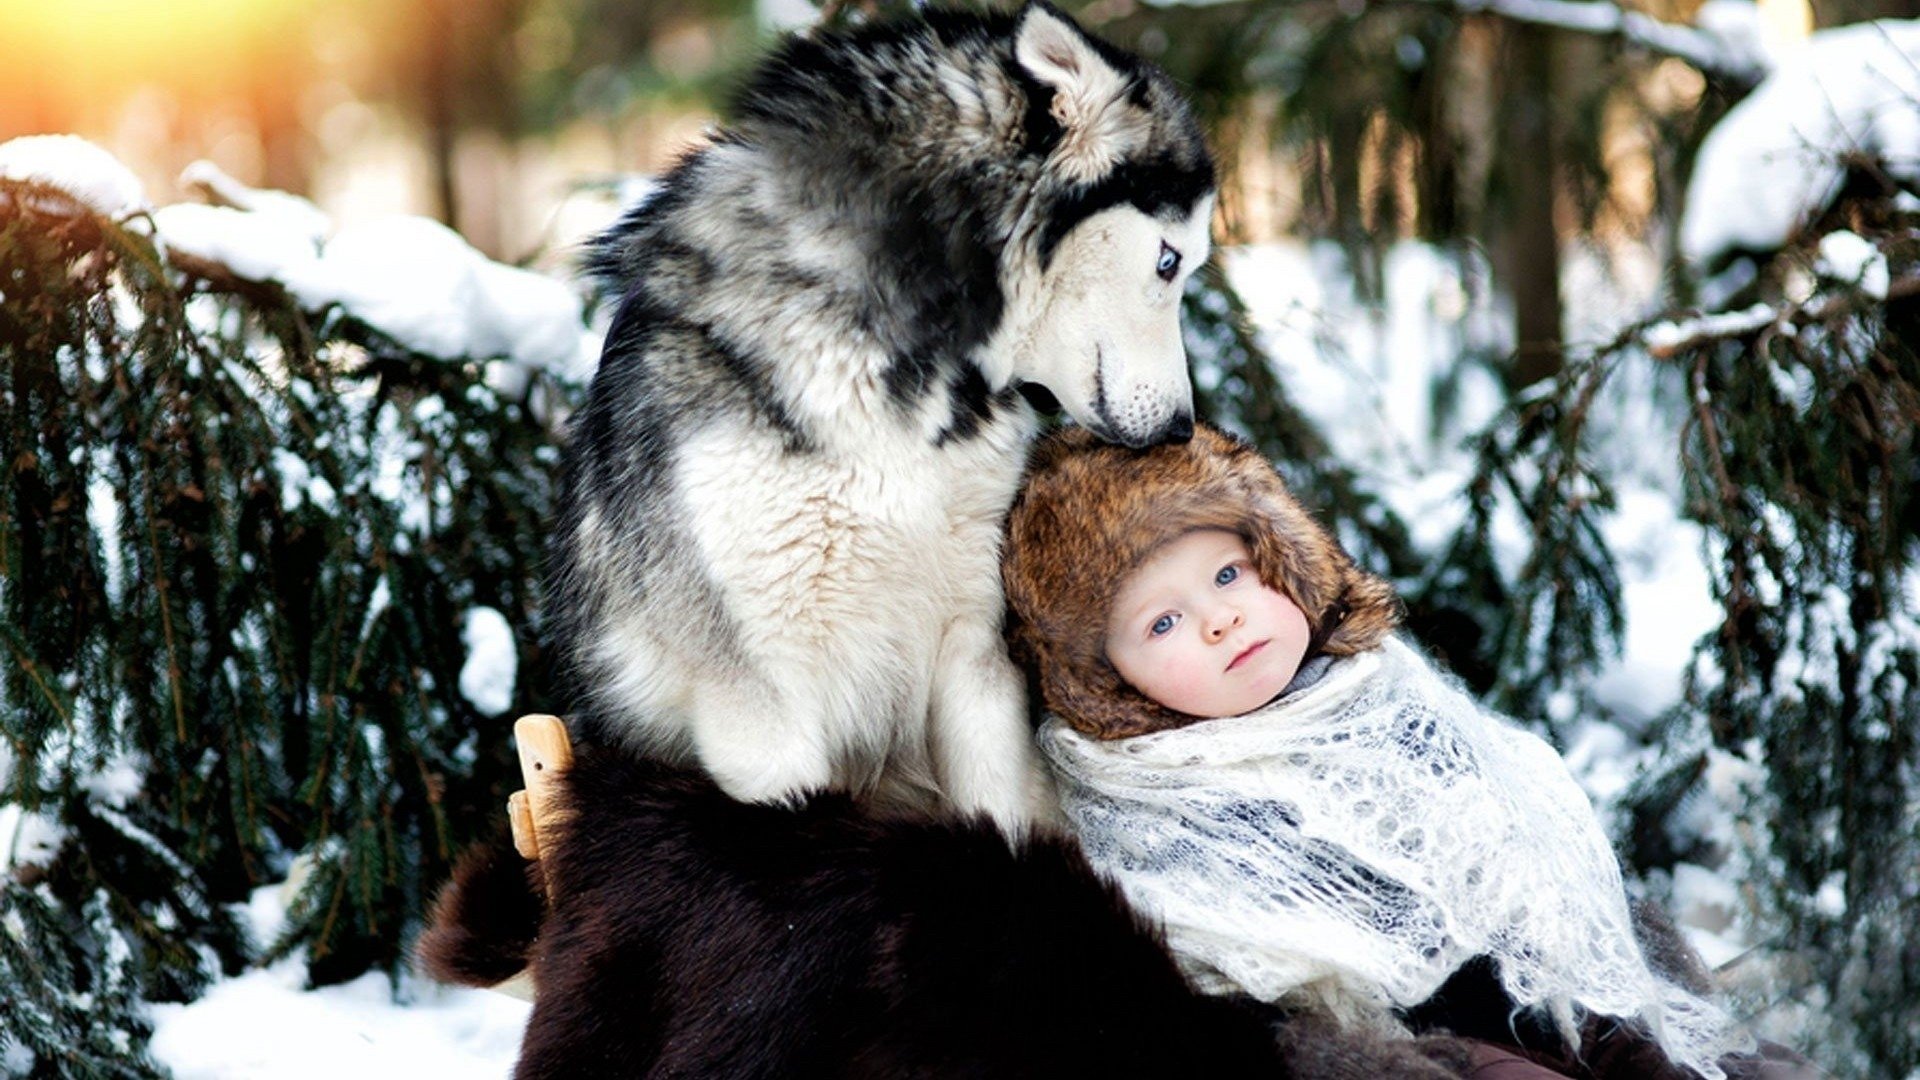 dog, Husky, Baby, Care, Forest, Snow, Winter Wallpaper